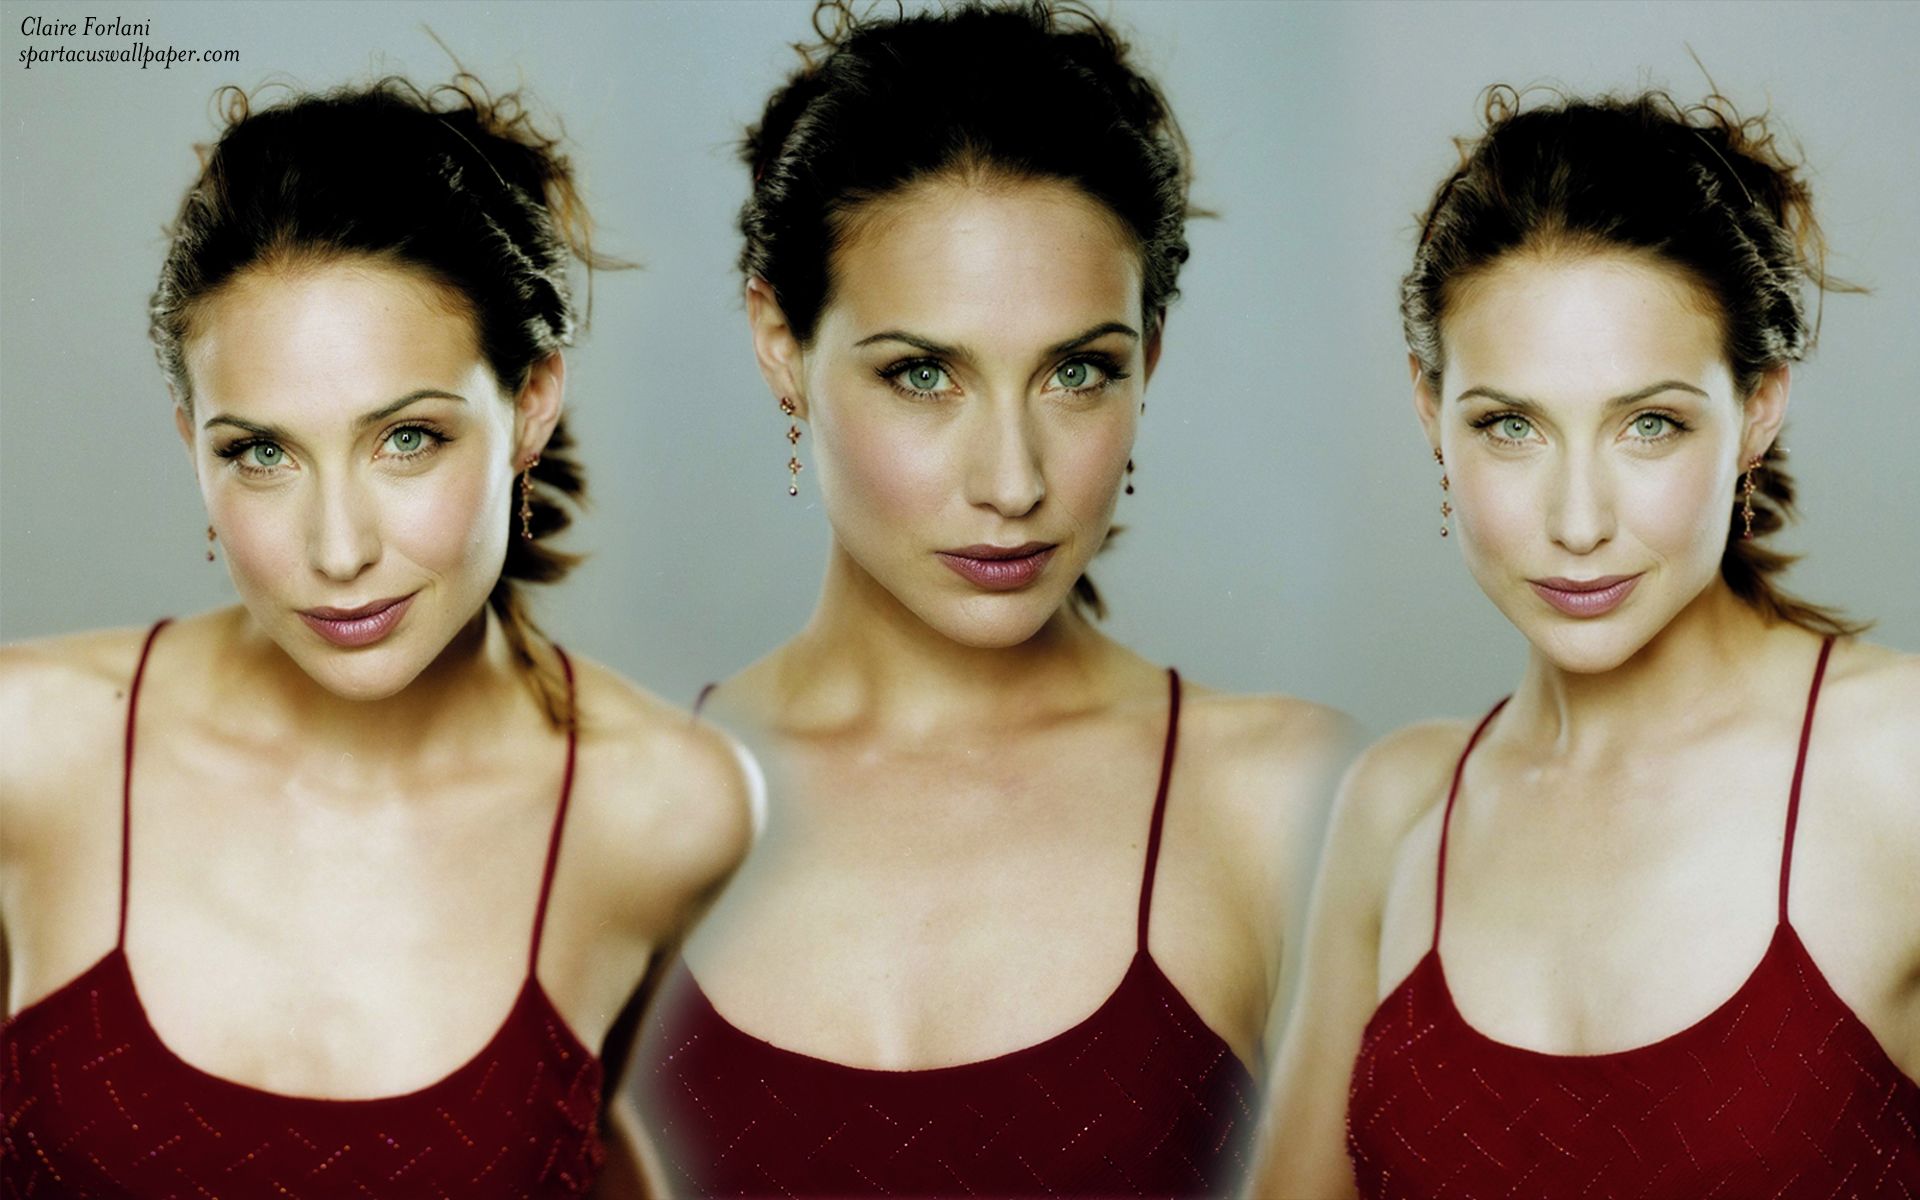 Claire Forlani II. Desktop Background. Mobile Home Screens